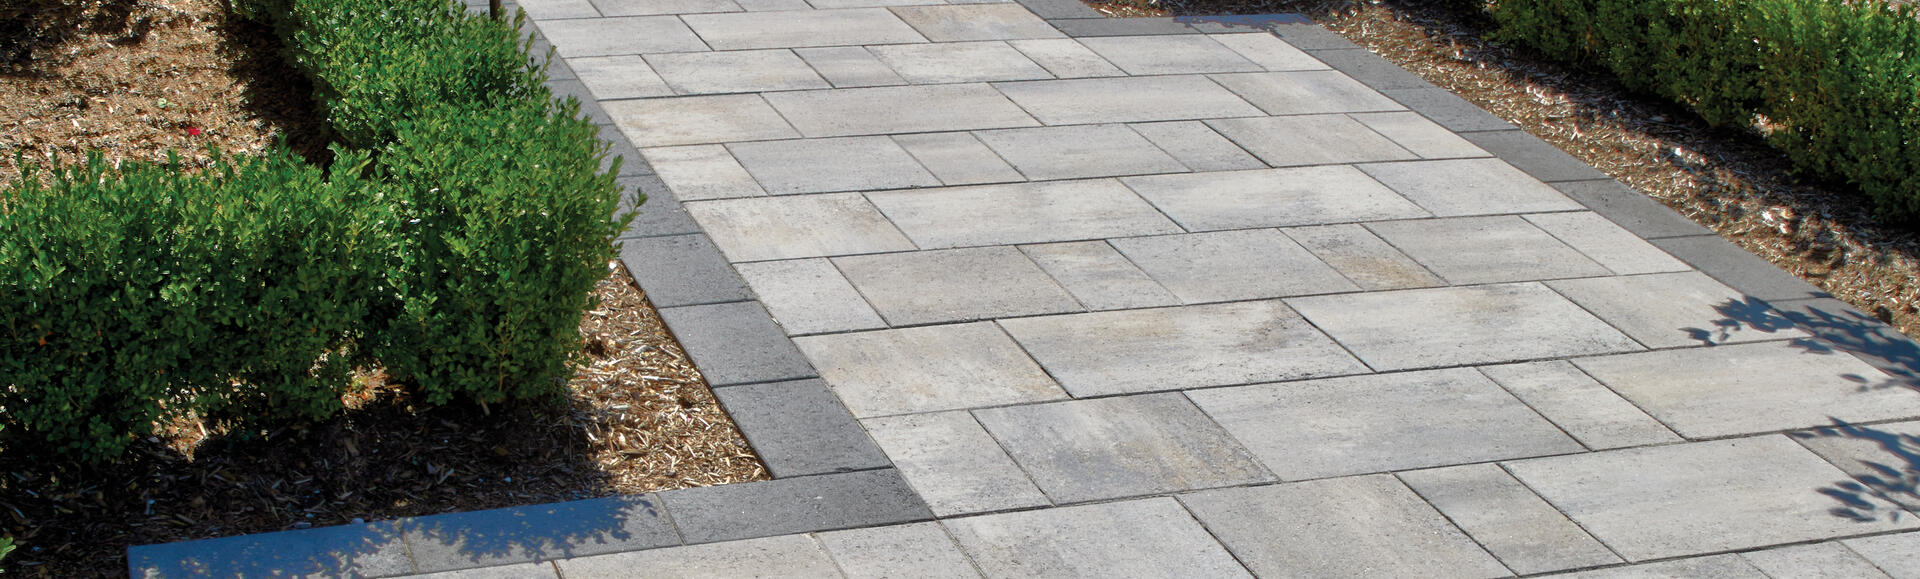 Nueva Paver in Champagne by Oaks Landscape Products